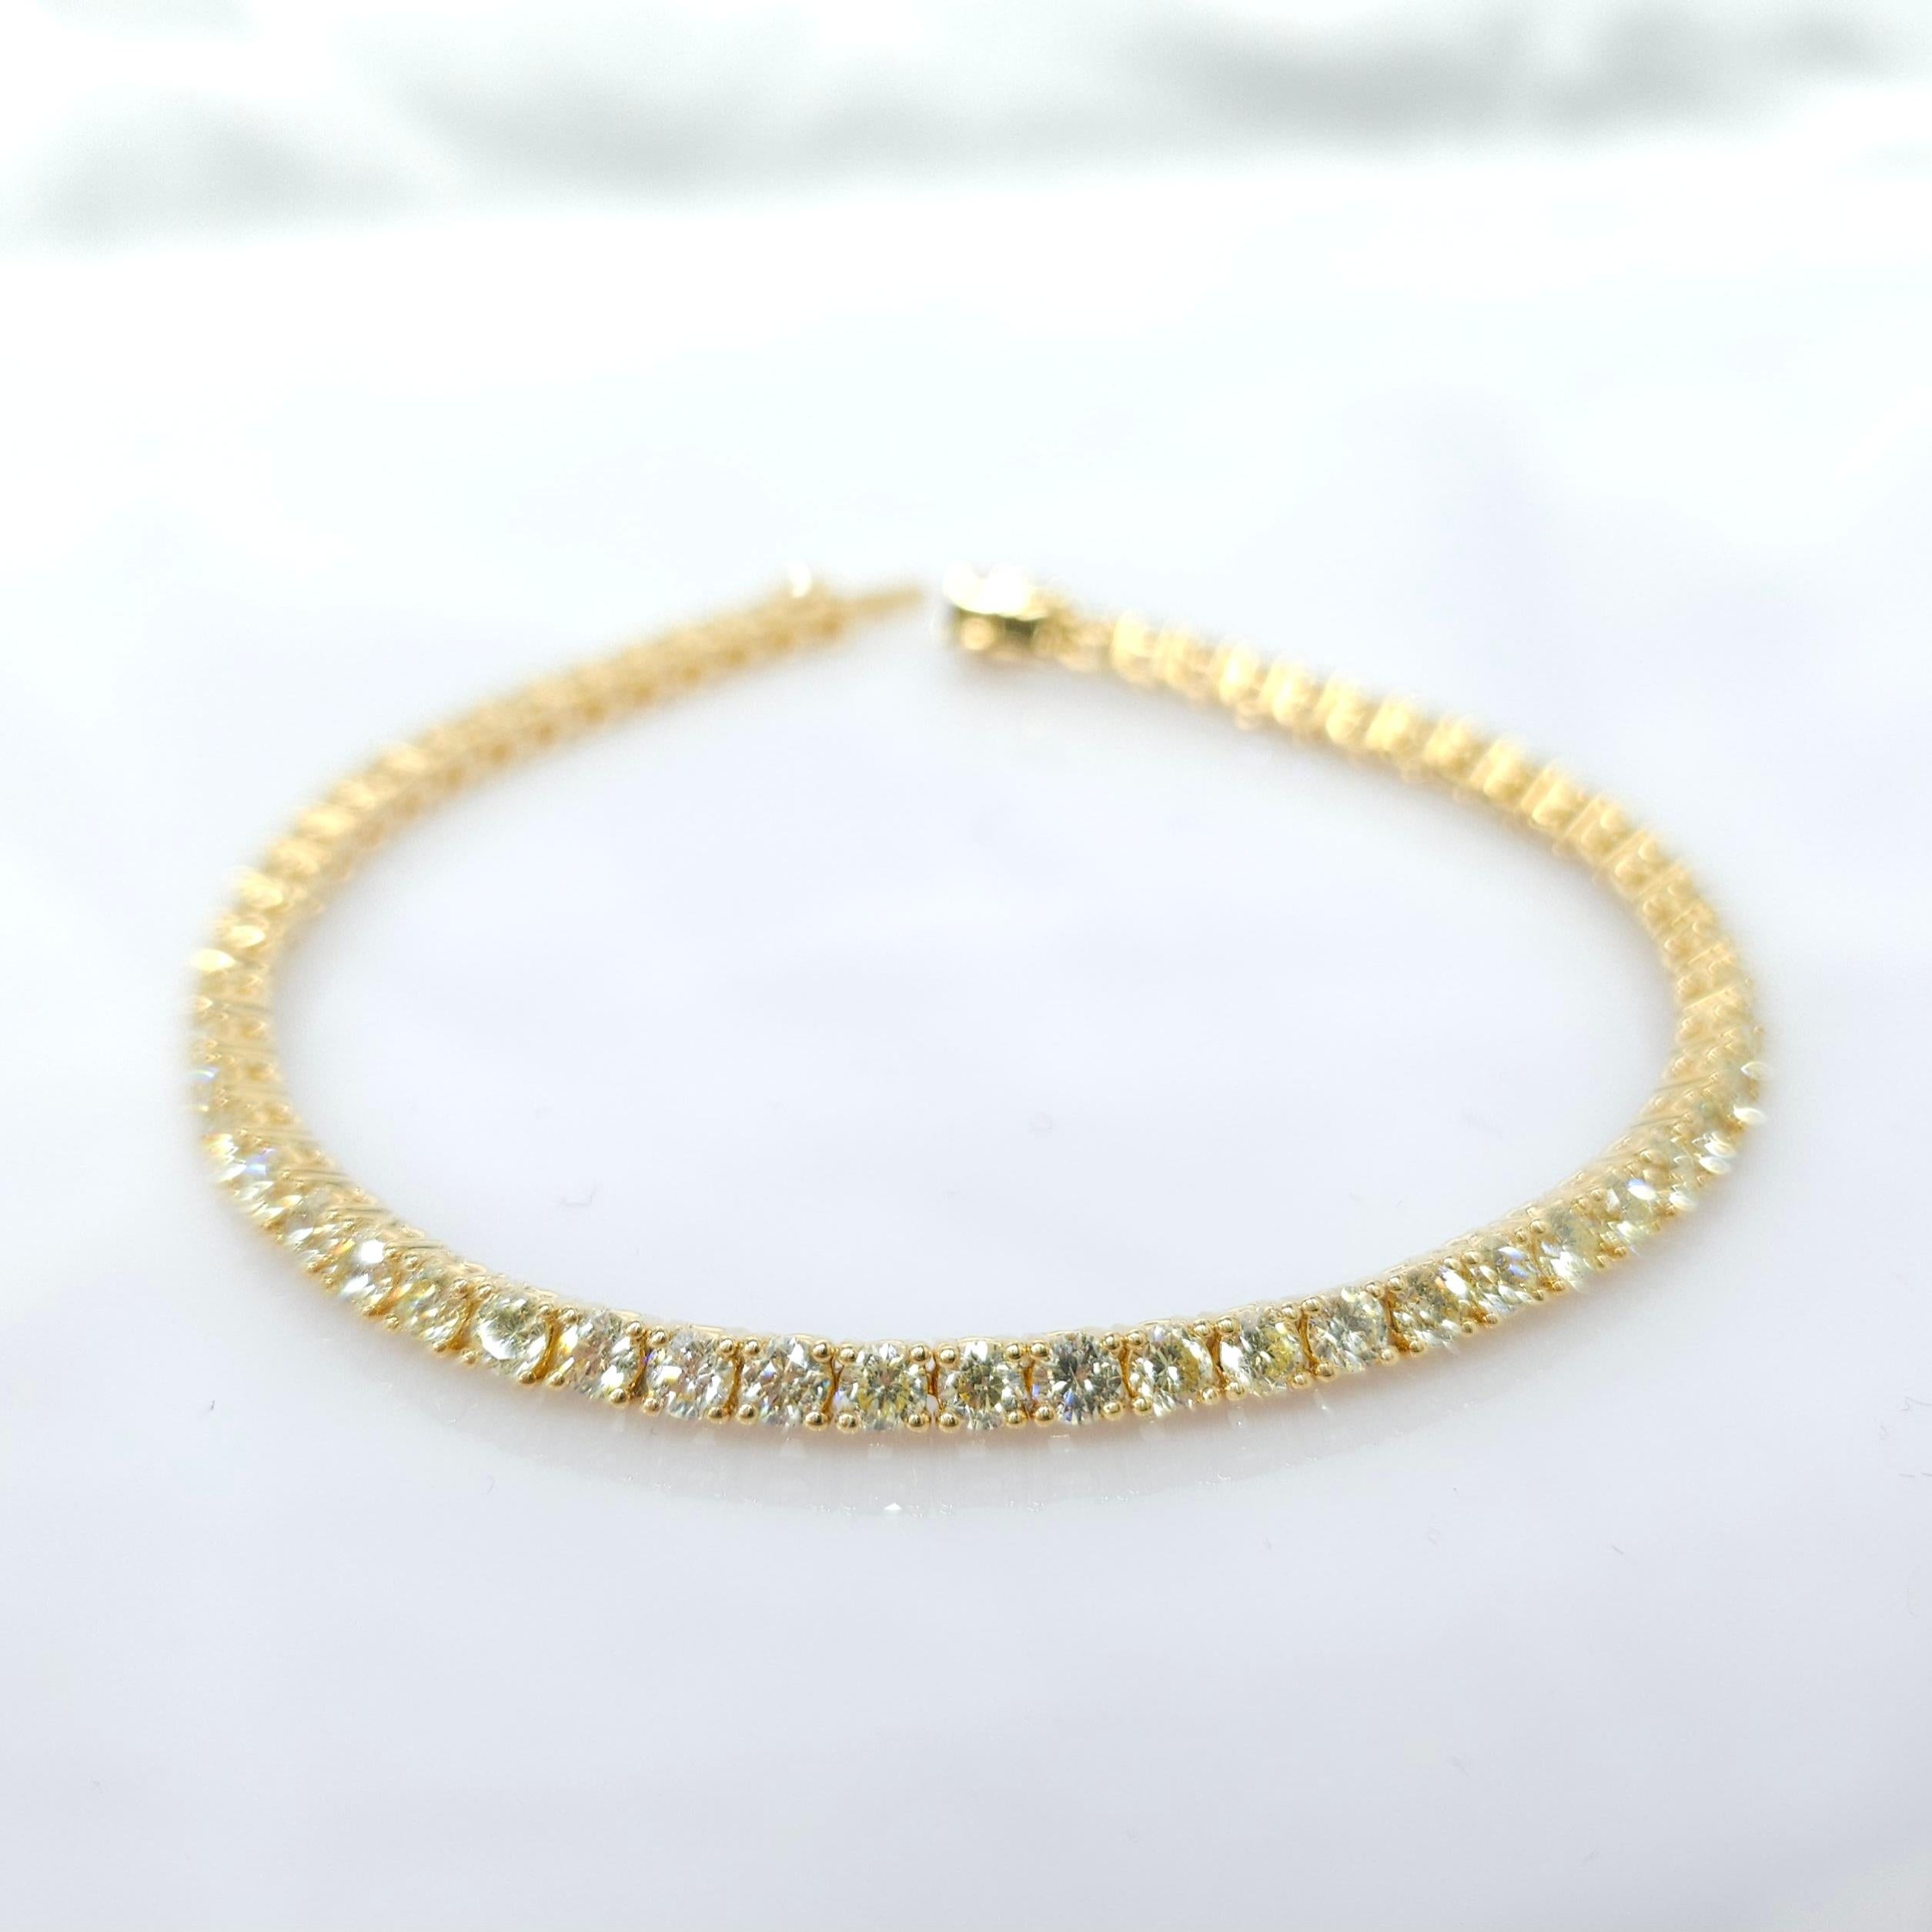 Elevate your style with the timeless sophistication of this 4.73 Carat Total Round Diamond Tennis Bracelet in 18K Yellow Gold. This exquisite piece exudes elegance and luxury, making it a versatile and stunning addition to any jewelry